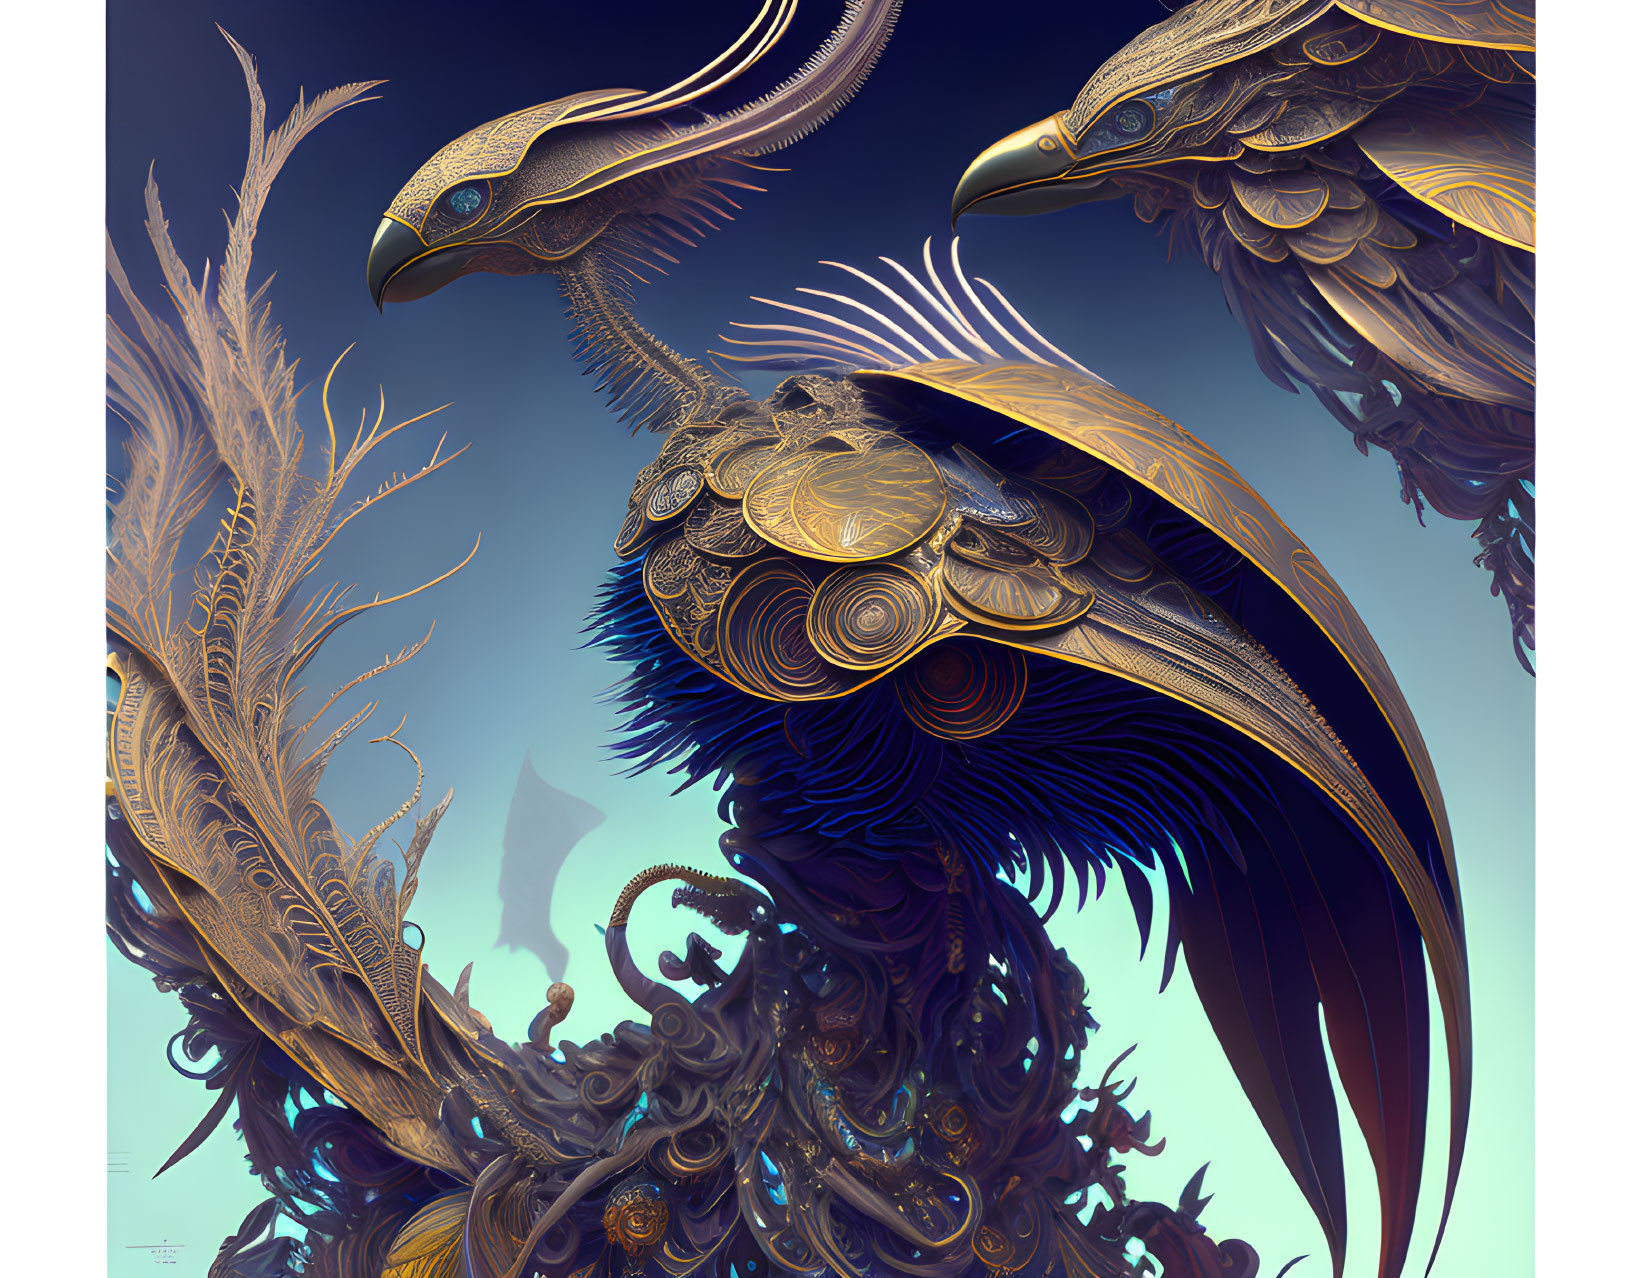 Stylized ornate birds with metallic accents on soft blue backdrop